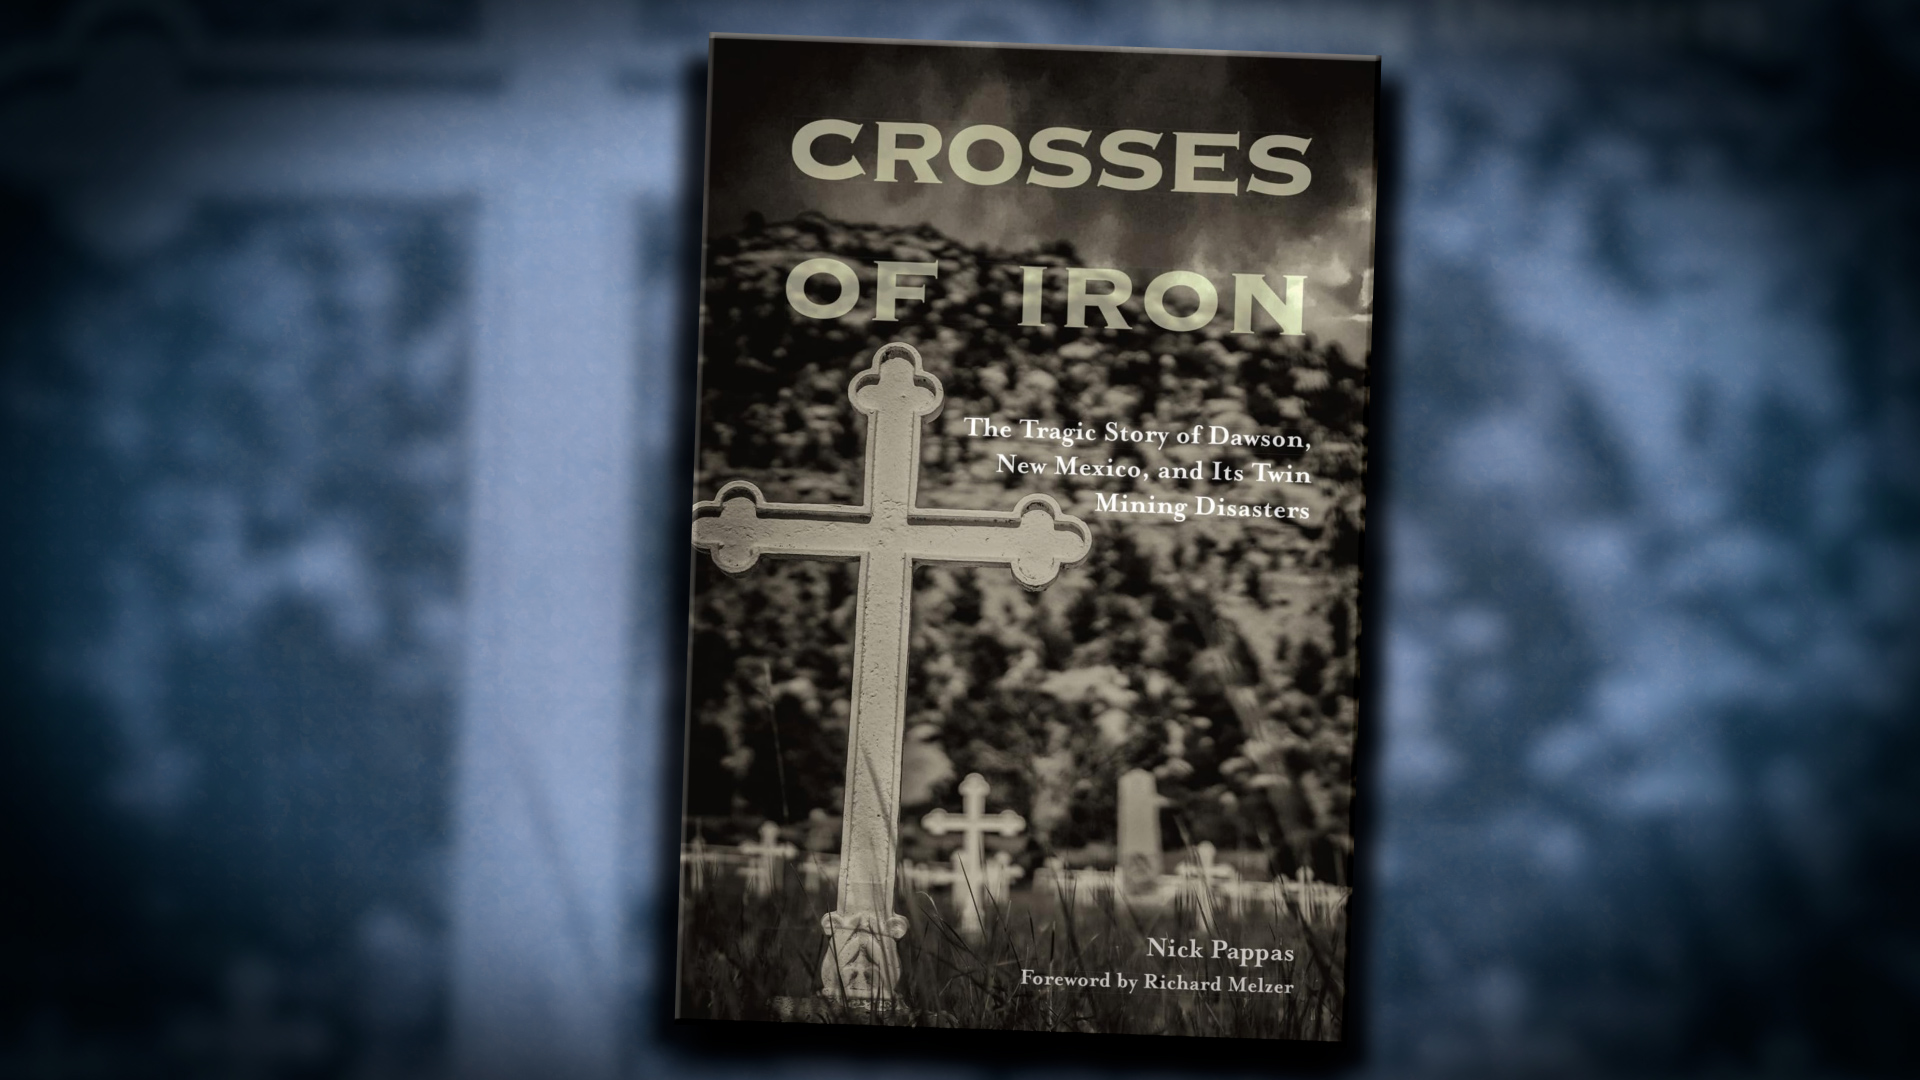 Writer Nick Pappas Remembers NM Ghost Town with New Book, “Crosses of Iron”